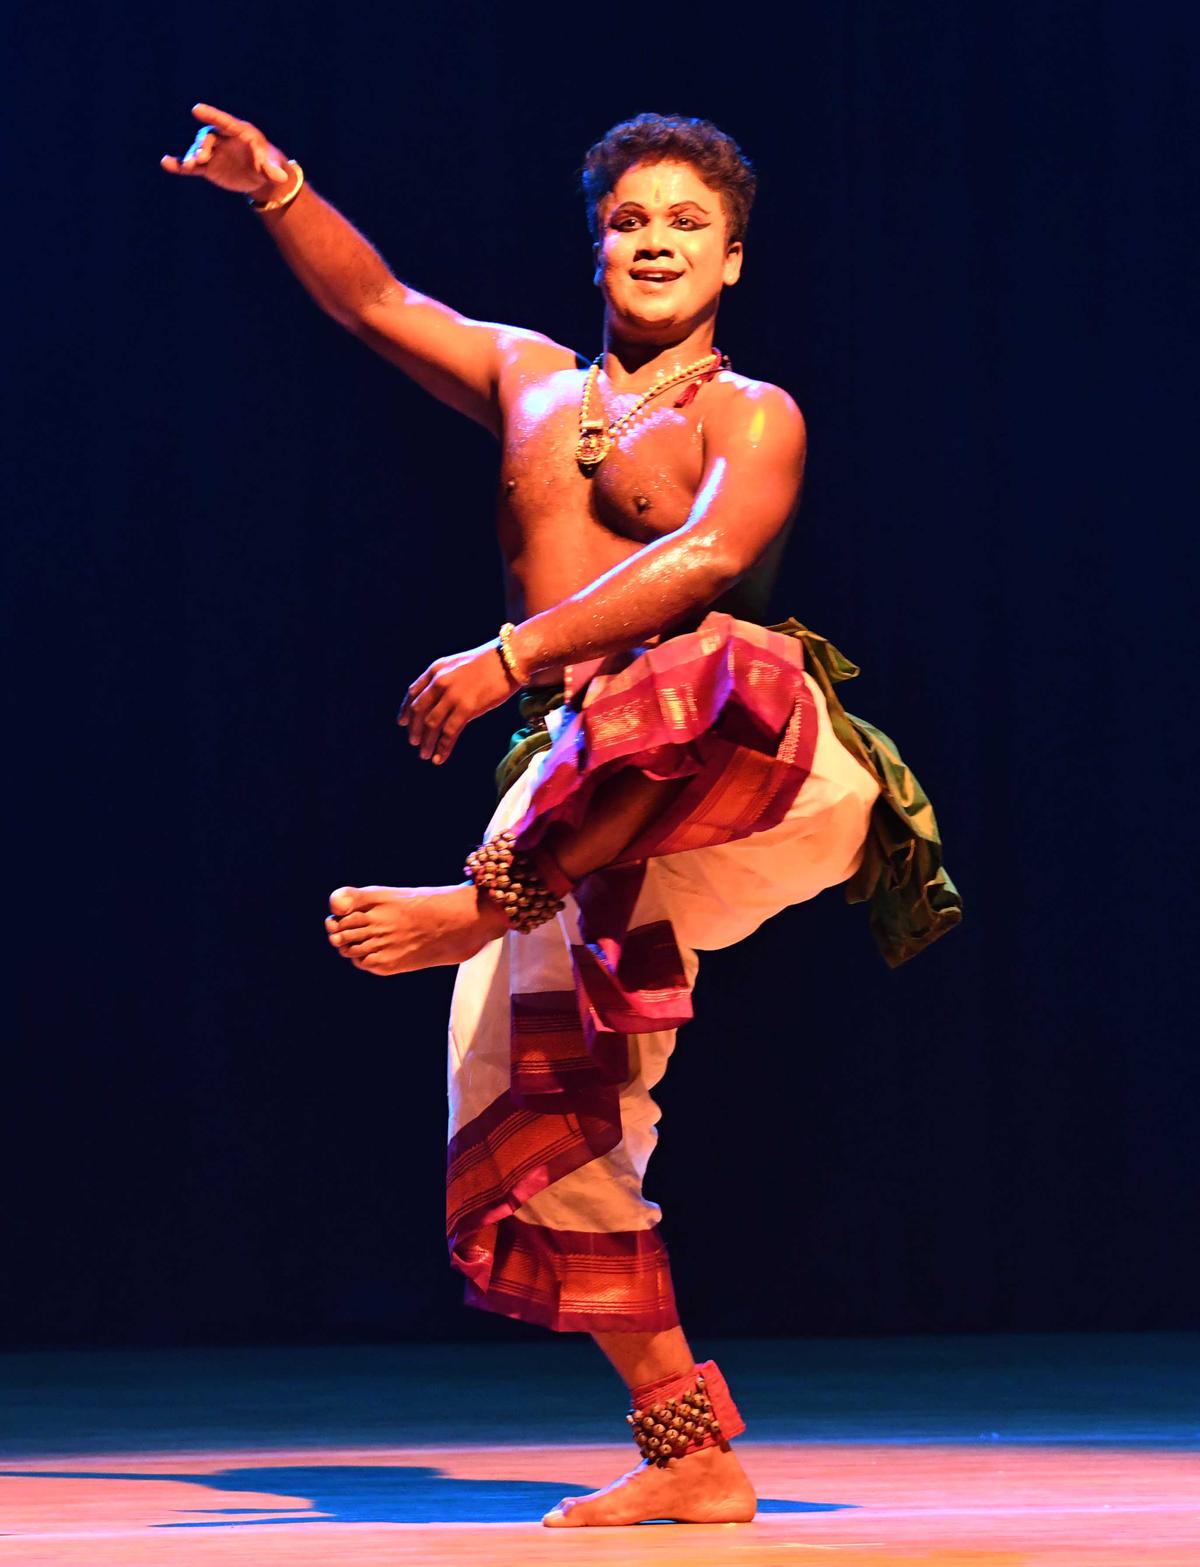 Bharatanatyam performance by Kaliveerapathiran at The Music Academy's Dance Festival on 04 January 2023.  